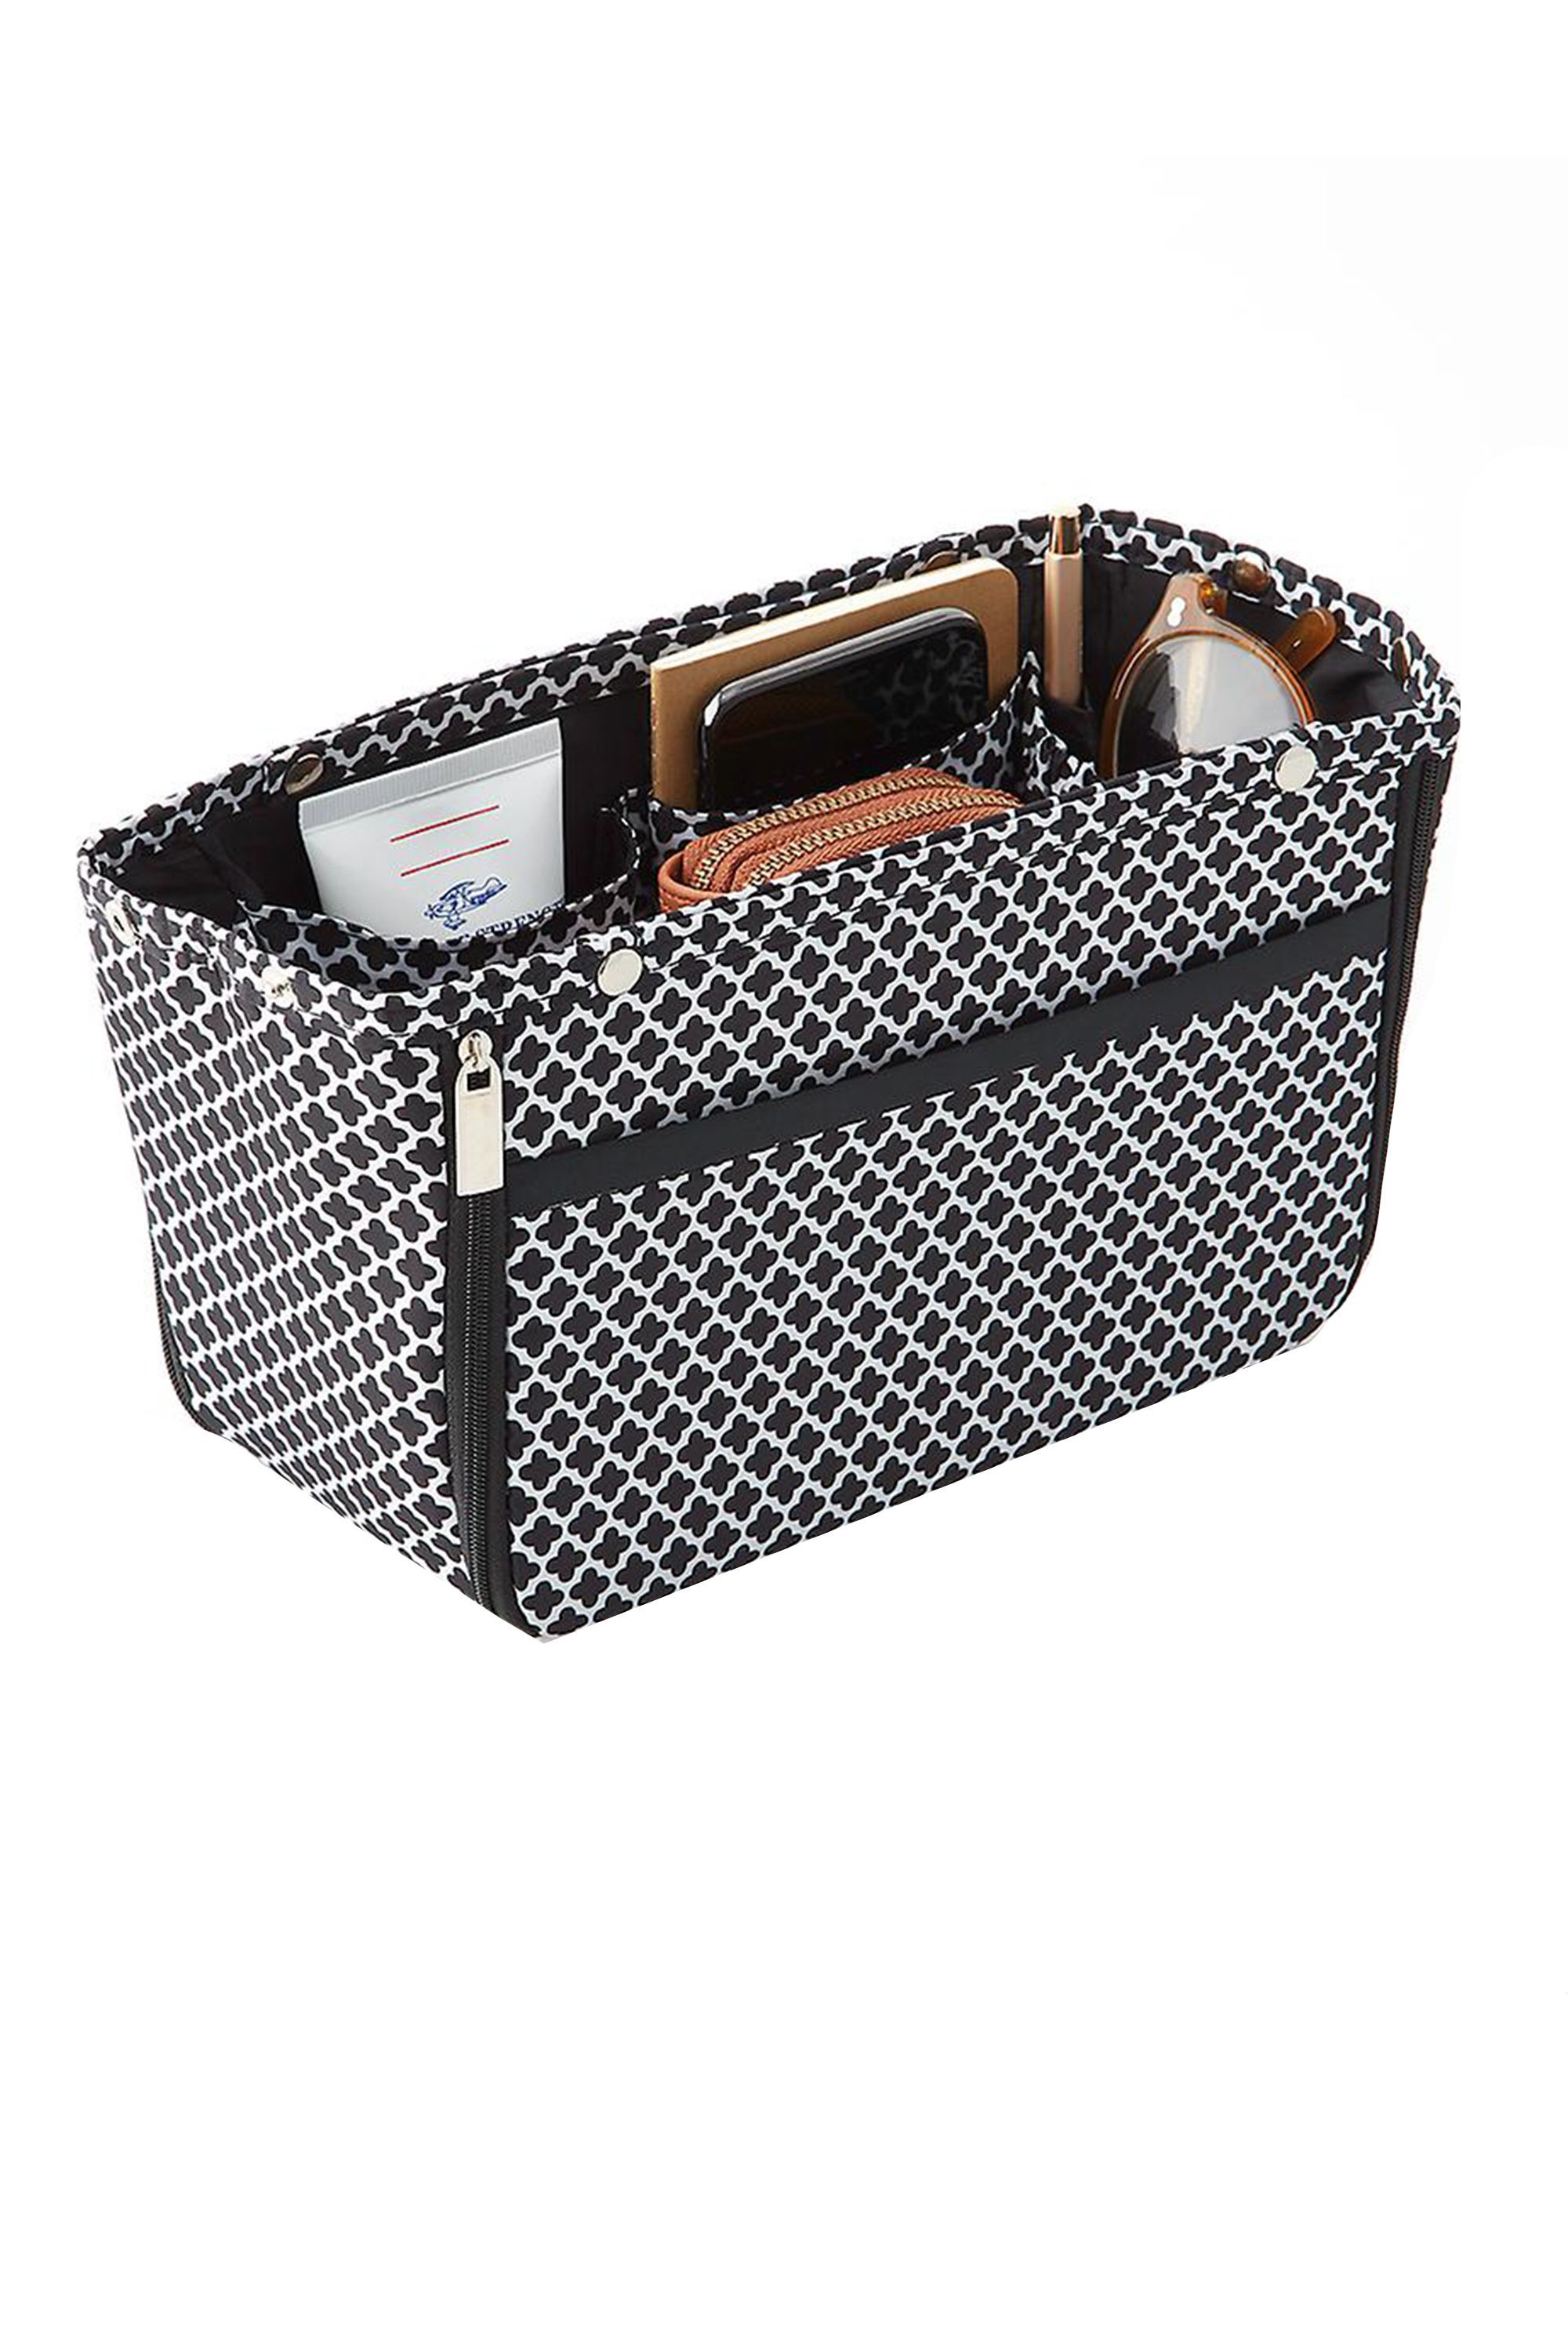 purses with organizer compartments